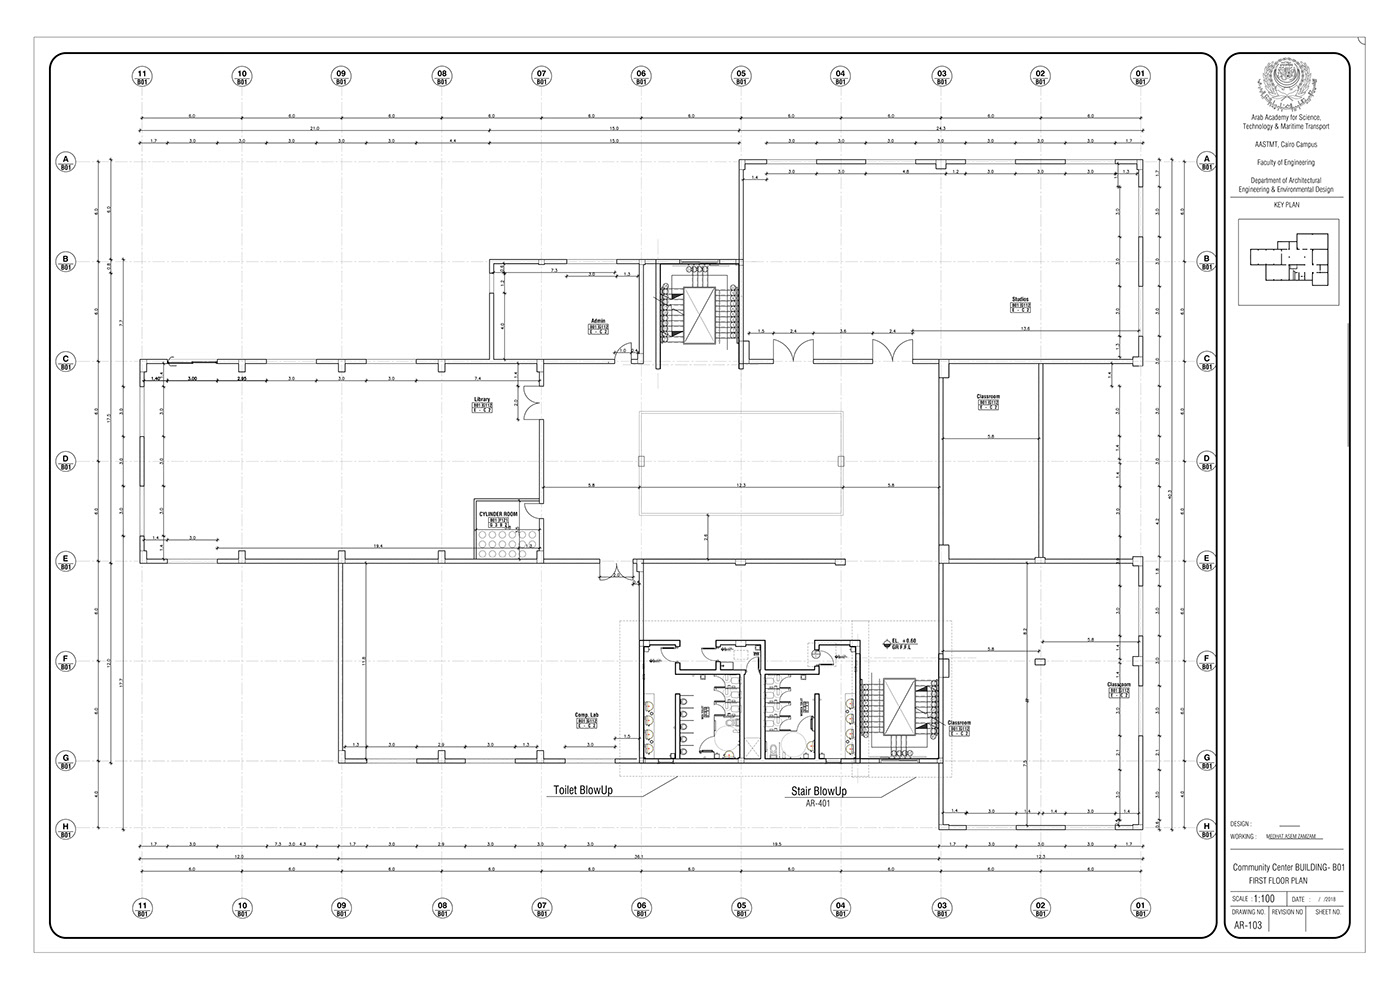 Data sheets shop drawings section Plan blowup Interior furniture working